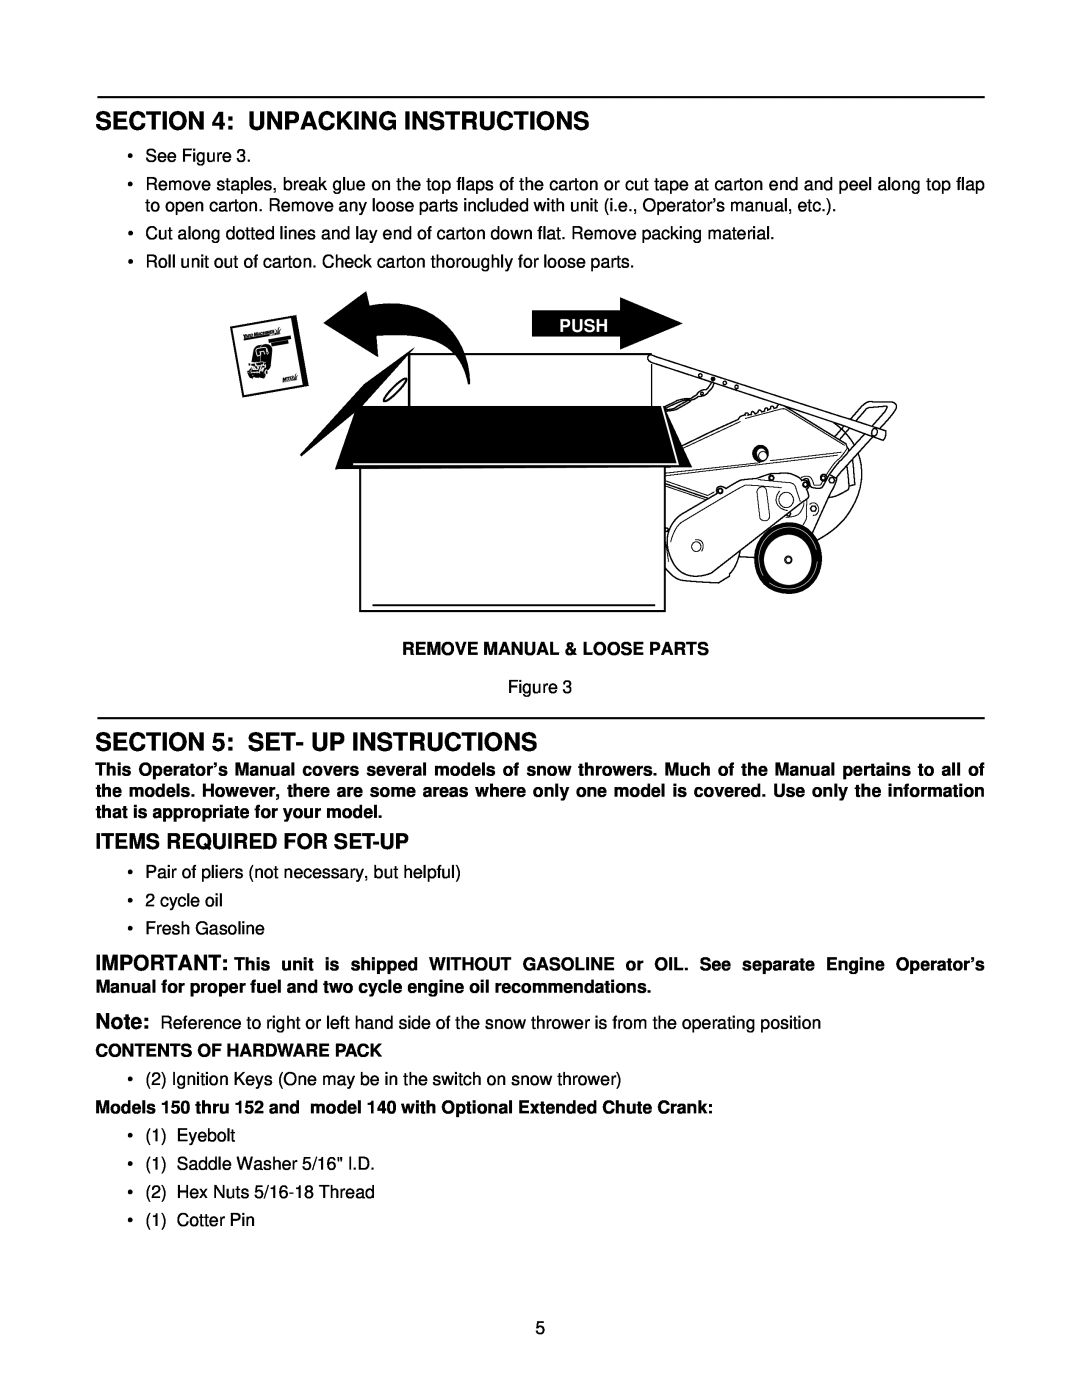 MTD Series 140 thru 152 manual Unpacking Instructions, Set- Up Instructions, Items Required For Set-Up, Push 